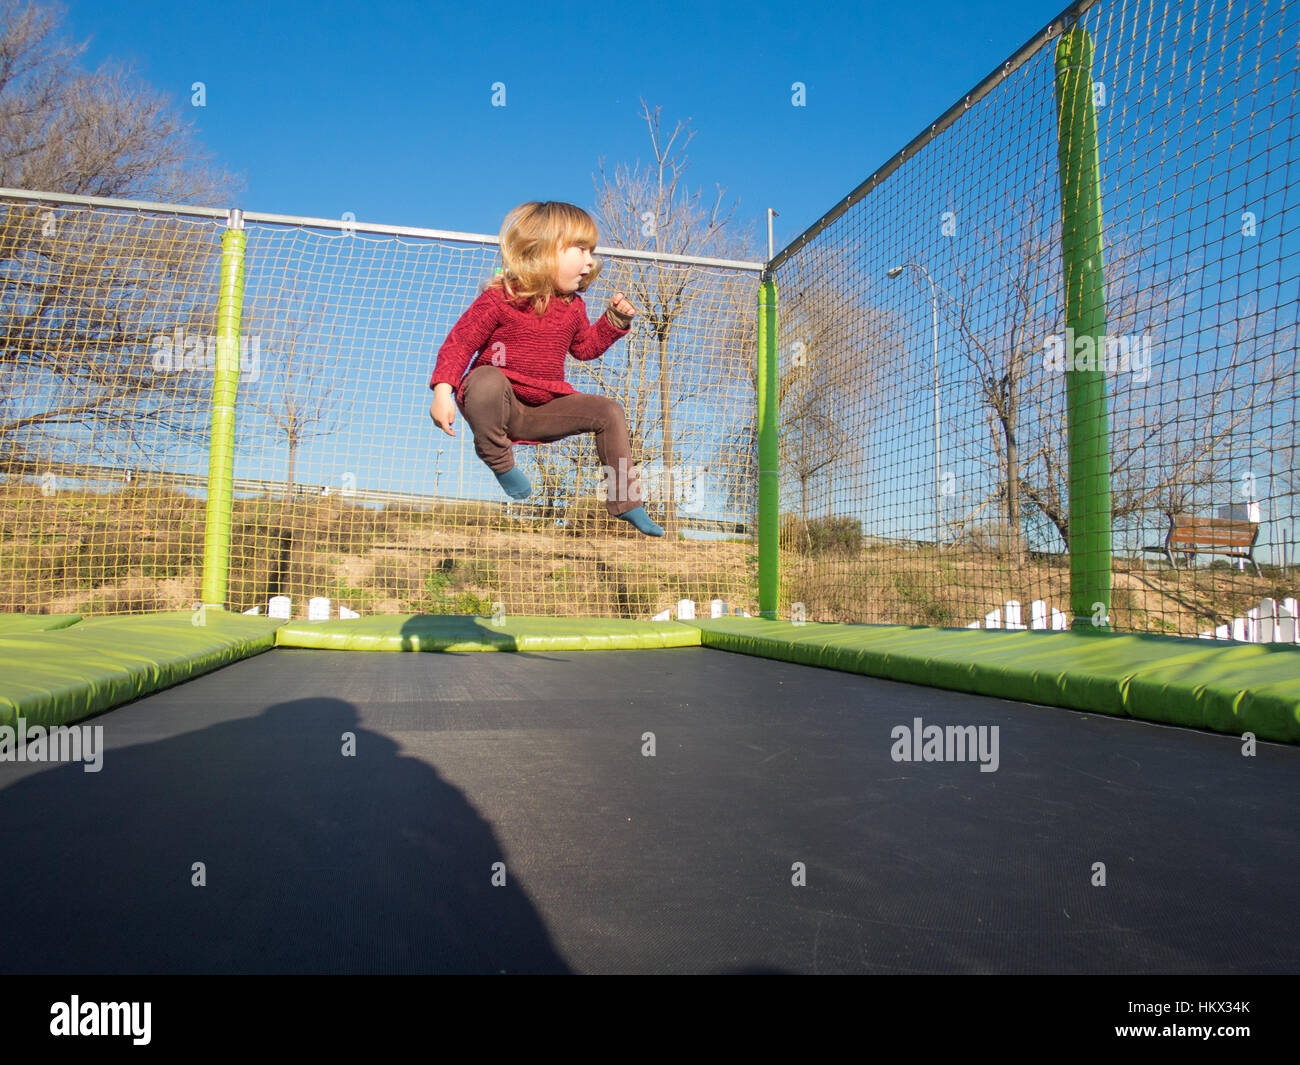 Happy three years old blonde child with winter red sweater trampolining or jumping on trampoline in outdoor playground Stock Photo